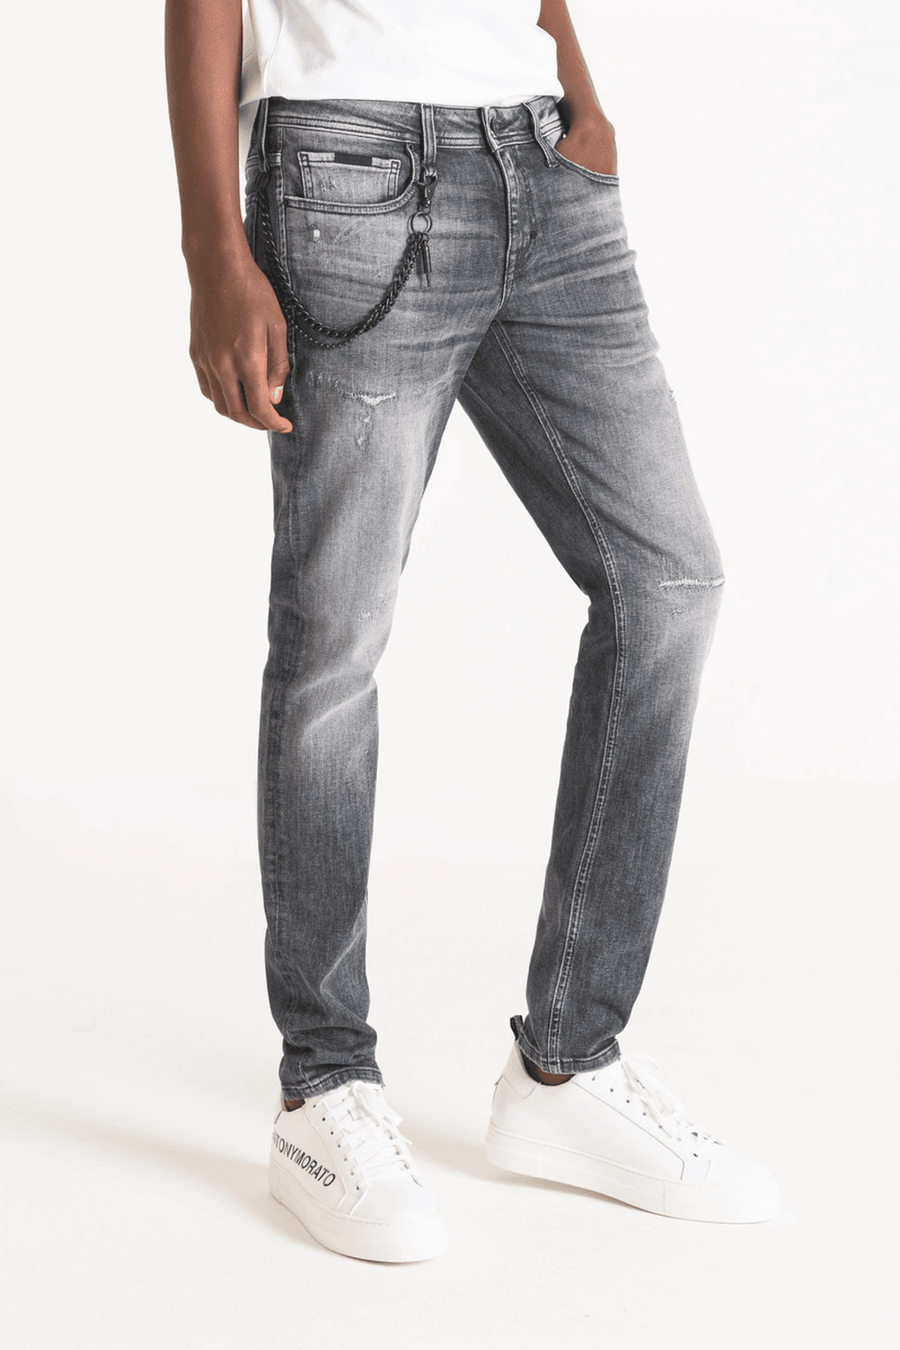 Buy the Antony Morato Iggy Tapered Fit Jeans in Grey at Intro. Spend £50 for free UK delivery. Official stockists. We ship worldwide.